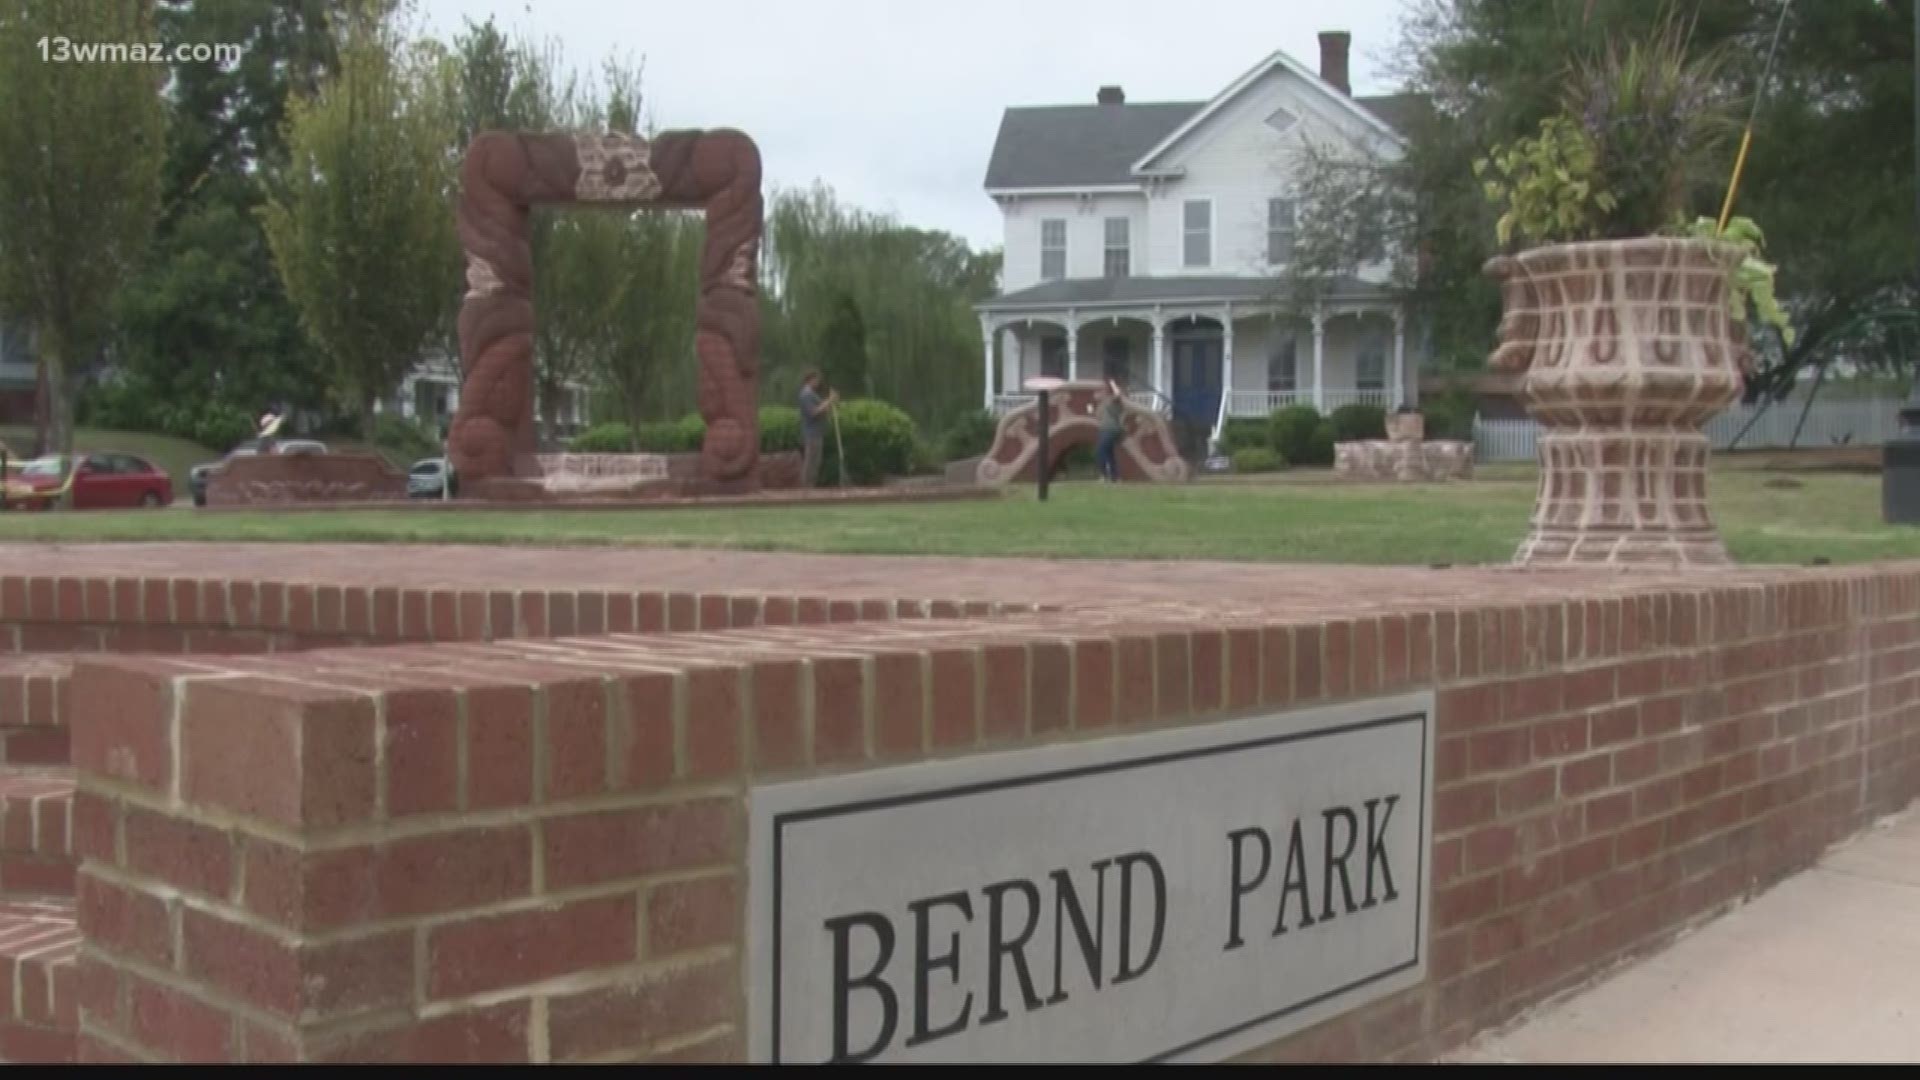 Bernd Park to open after 2 years of planning